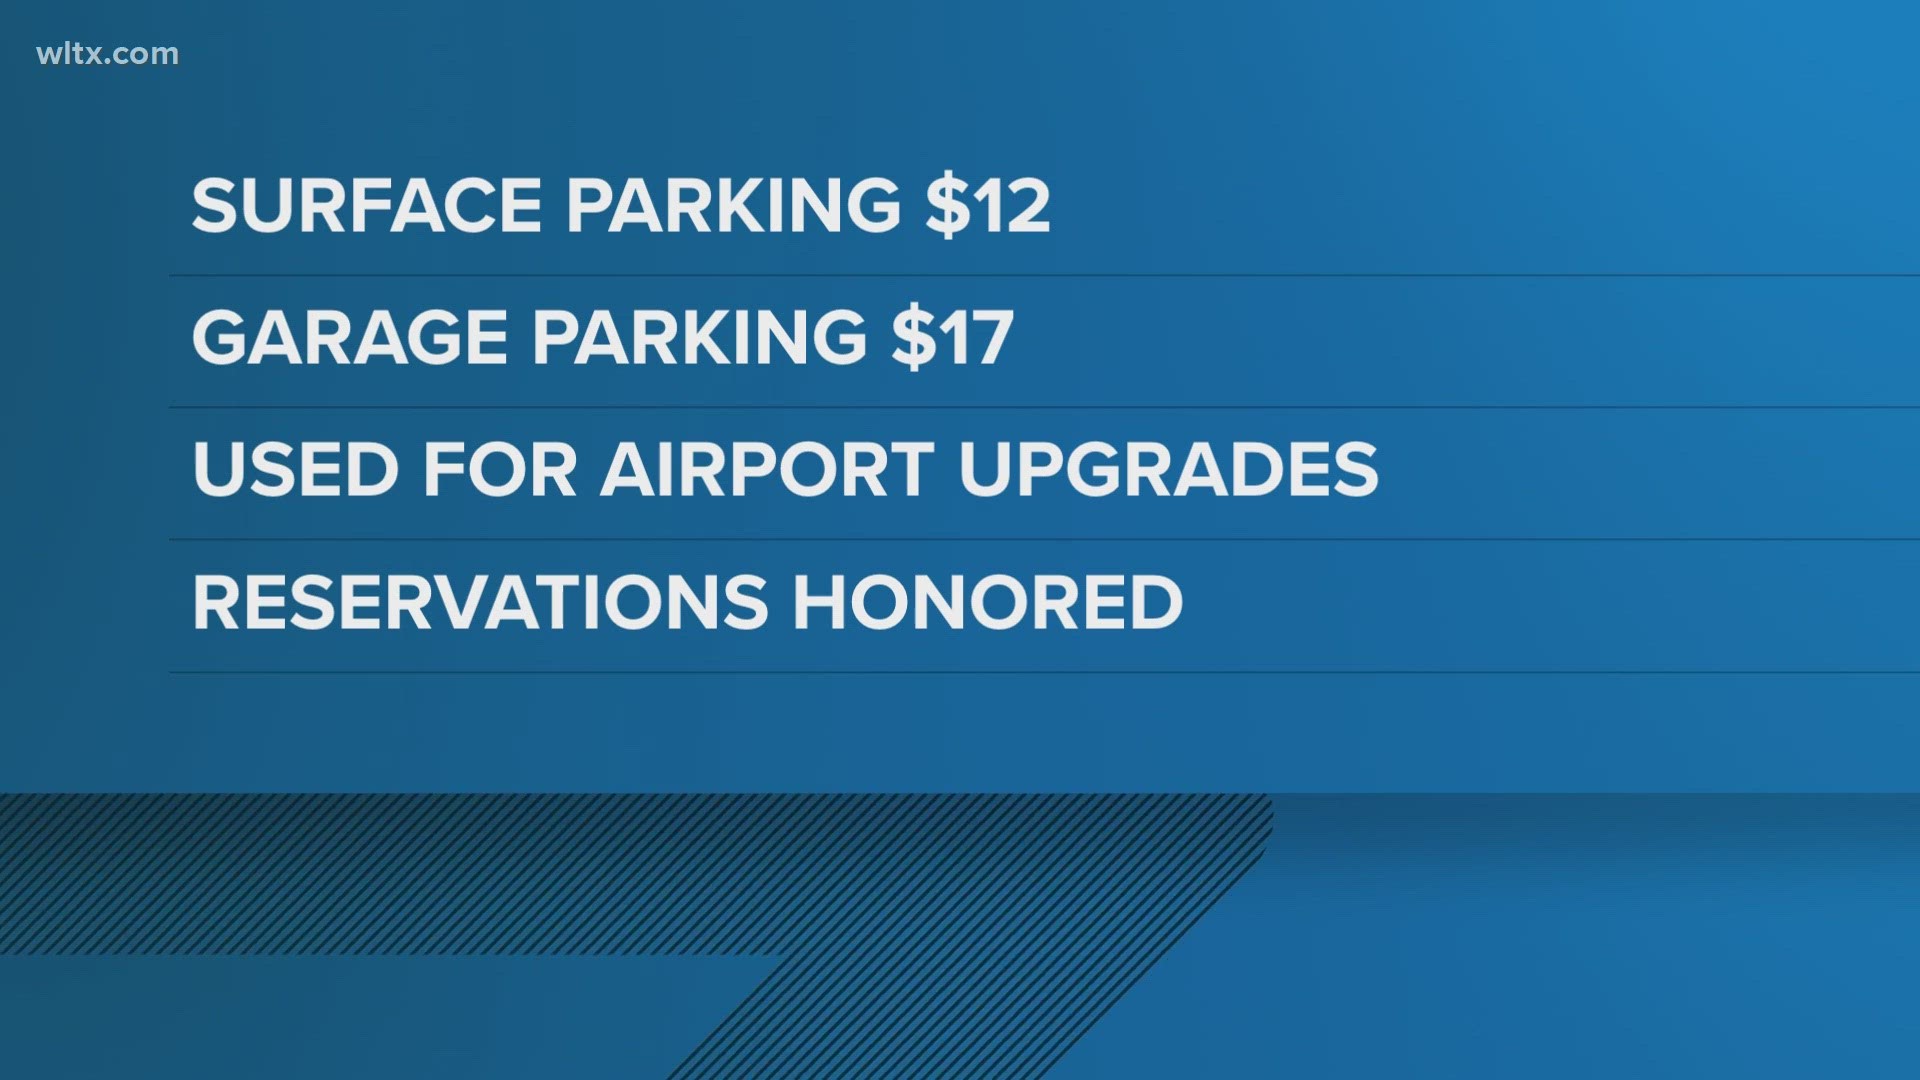 Beginning May 1 the airport says surface parking will rise to $12 a day and garage parking will now be $17/day.